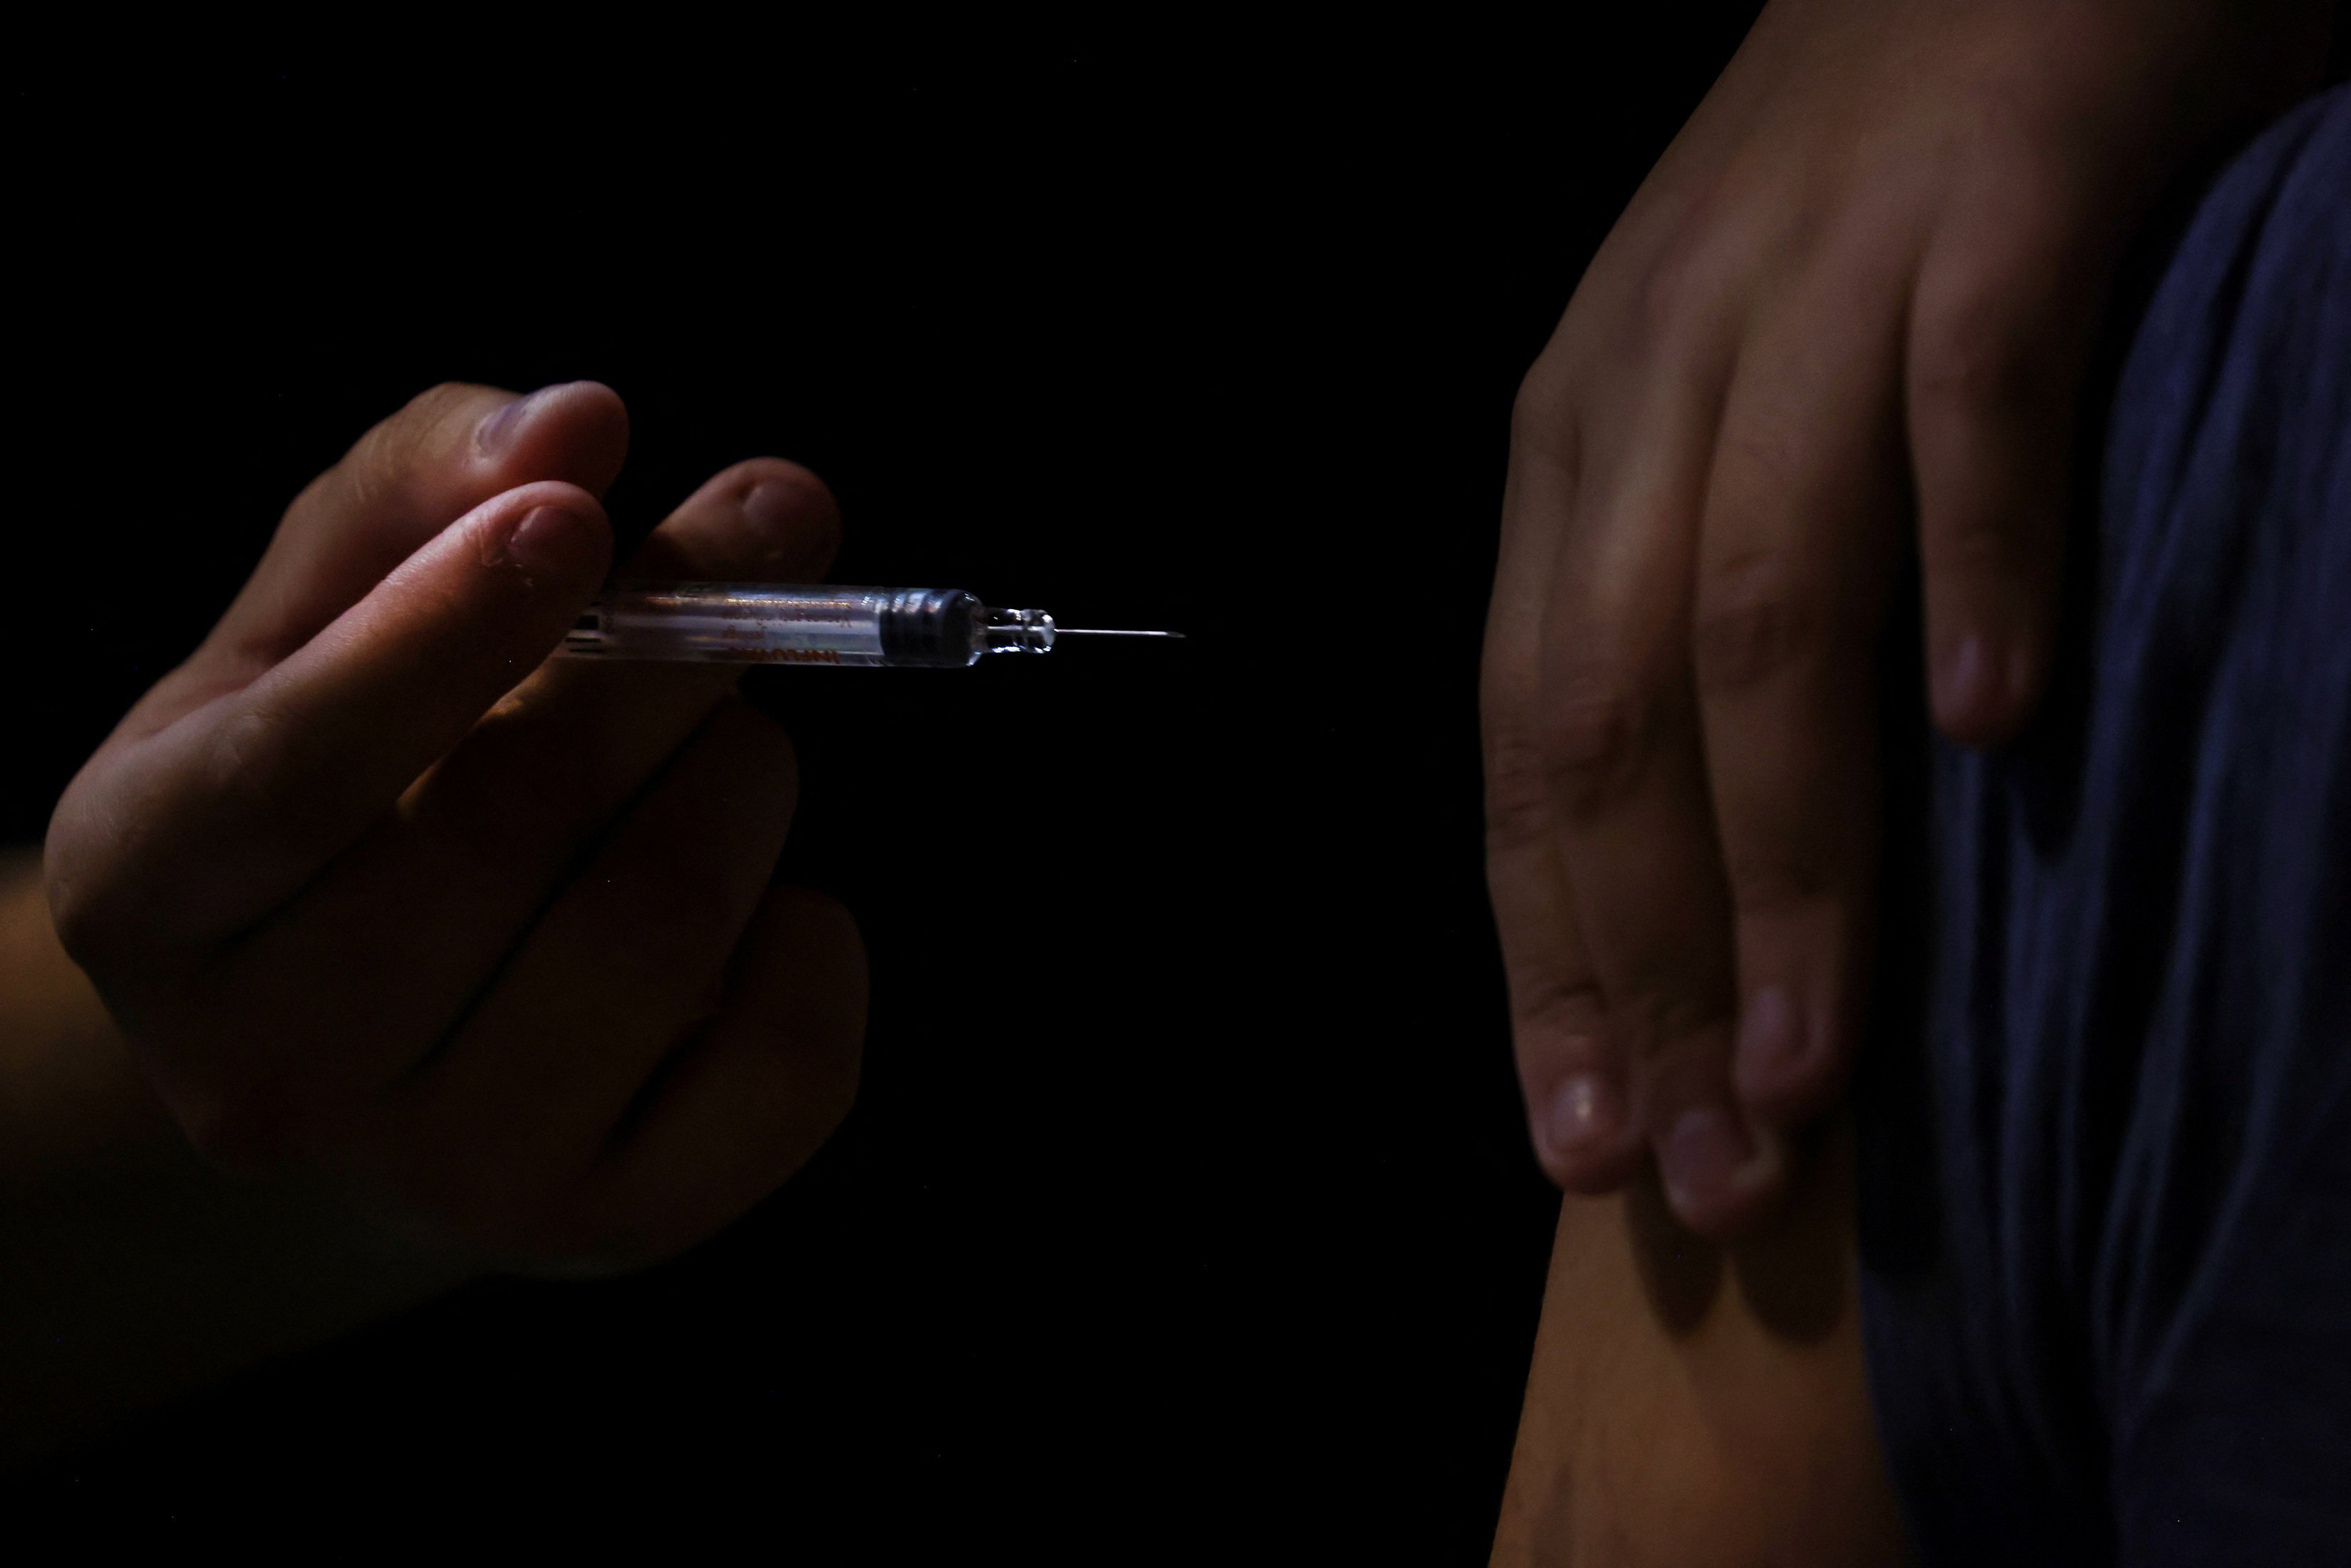 The Health Ministry confirmed that this was the second death related to Covid-19 vaccination in Singapore. The first was a 28-year-old Bangladeshi man who died of myocarditis in July 2021, about three weeks after receiving a vaccine shot. Photo: Reuters